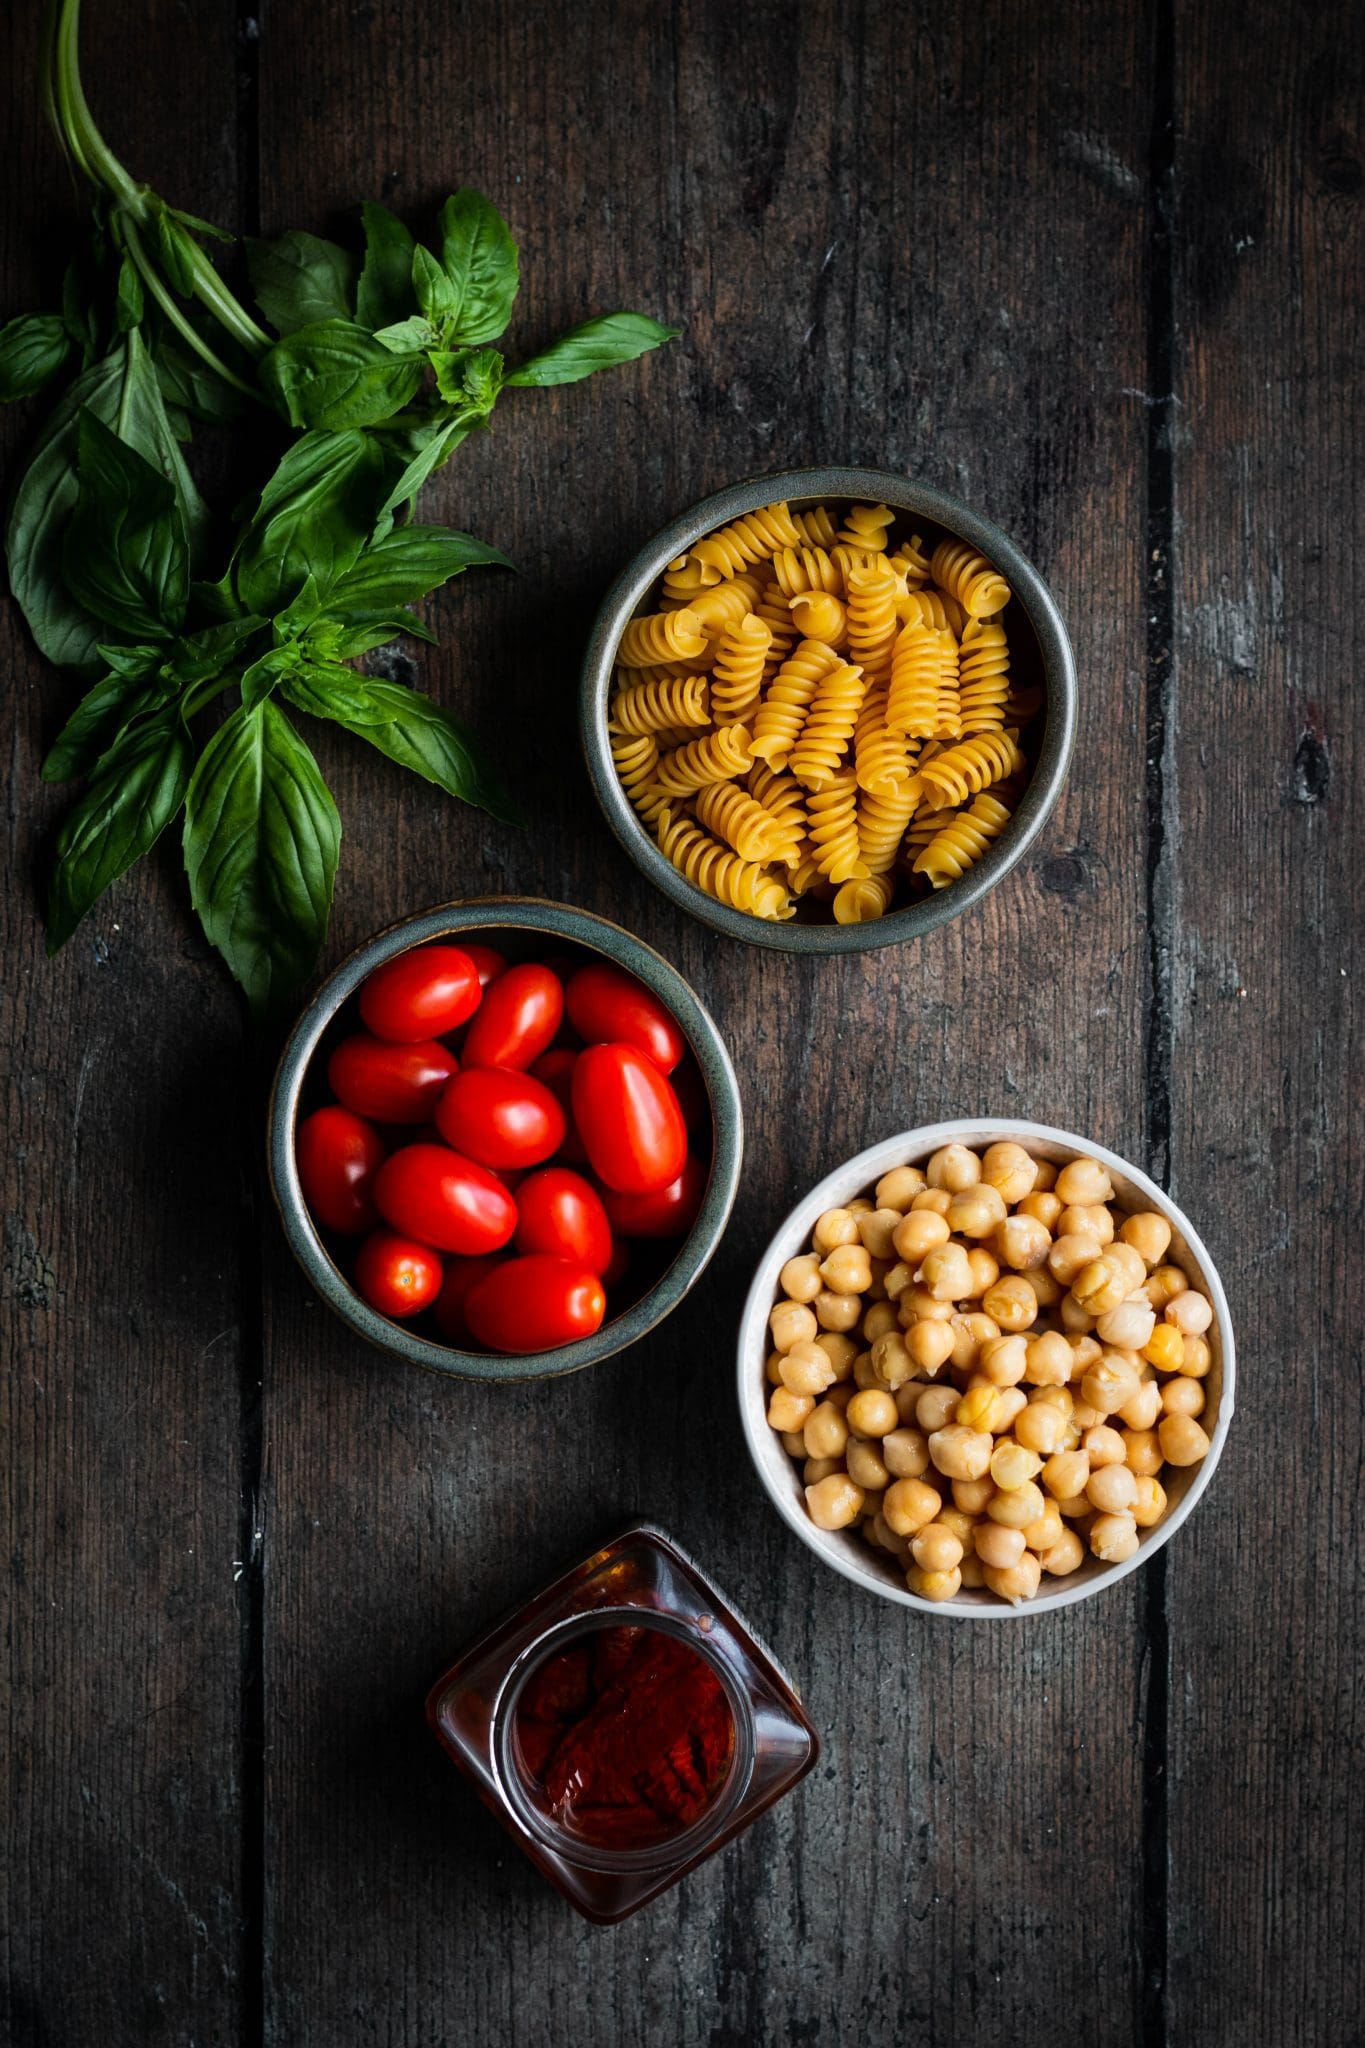 pasta, cherry tomatoes, chickpeas, sundried tomatoes in bowls, plus basil leaves